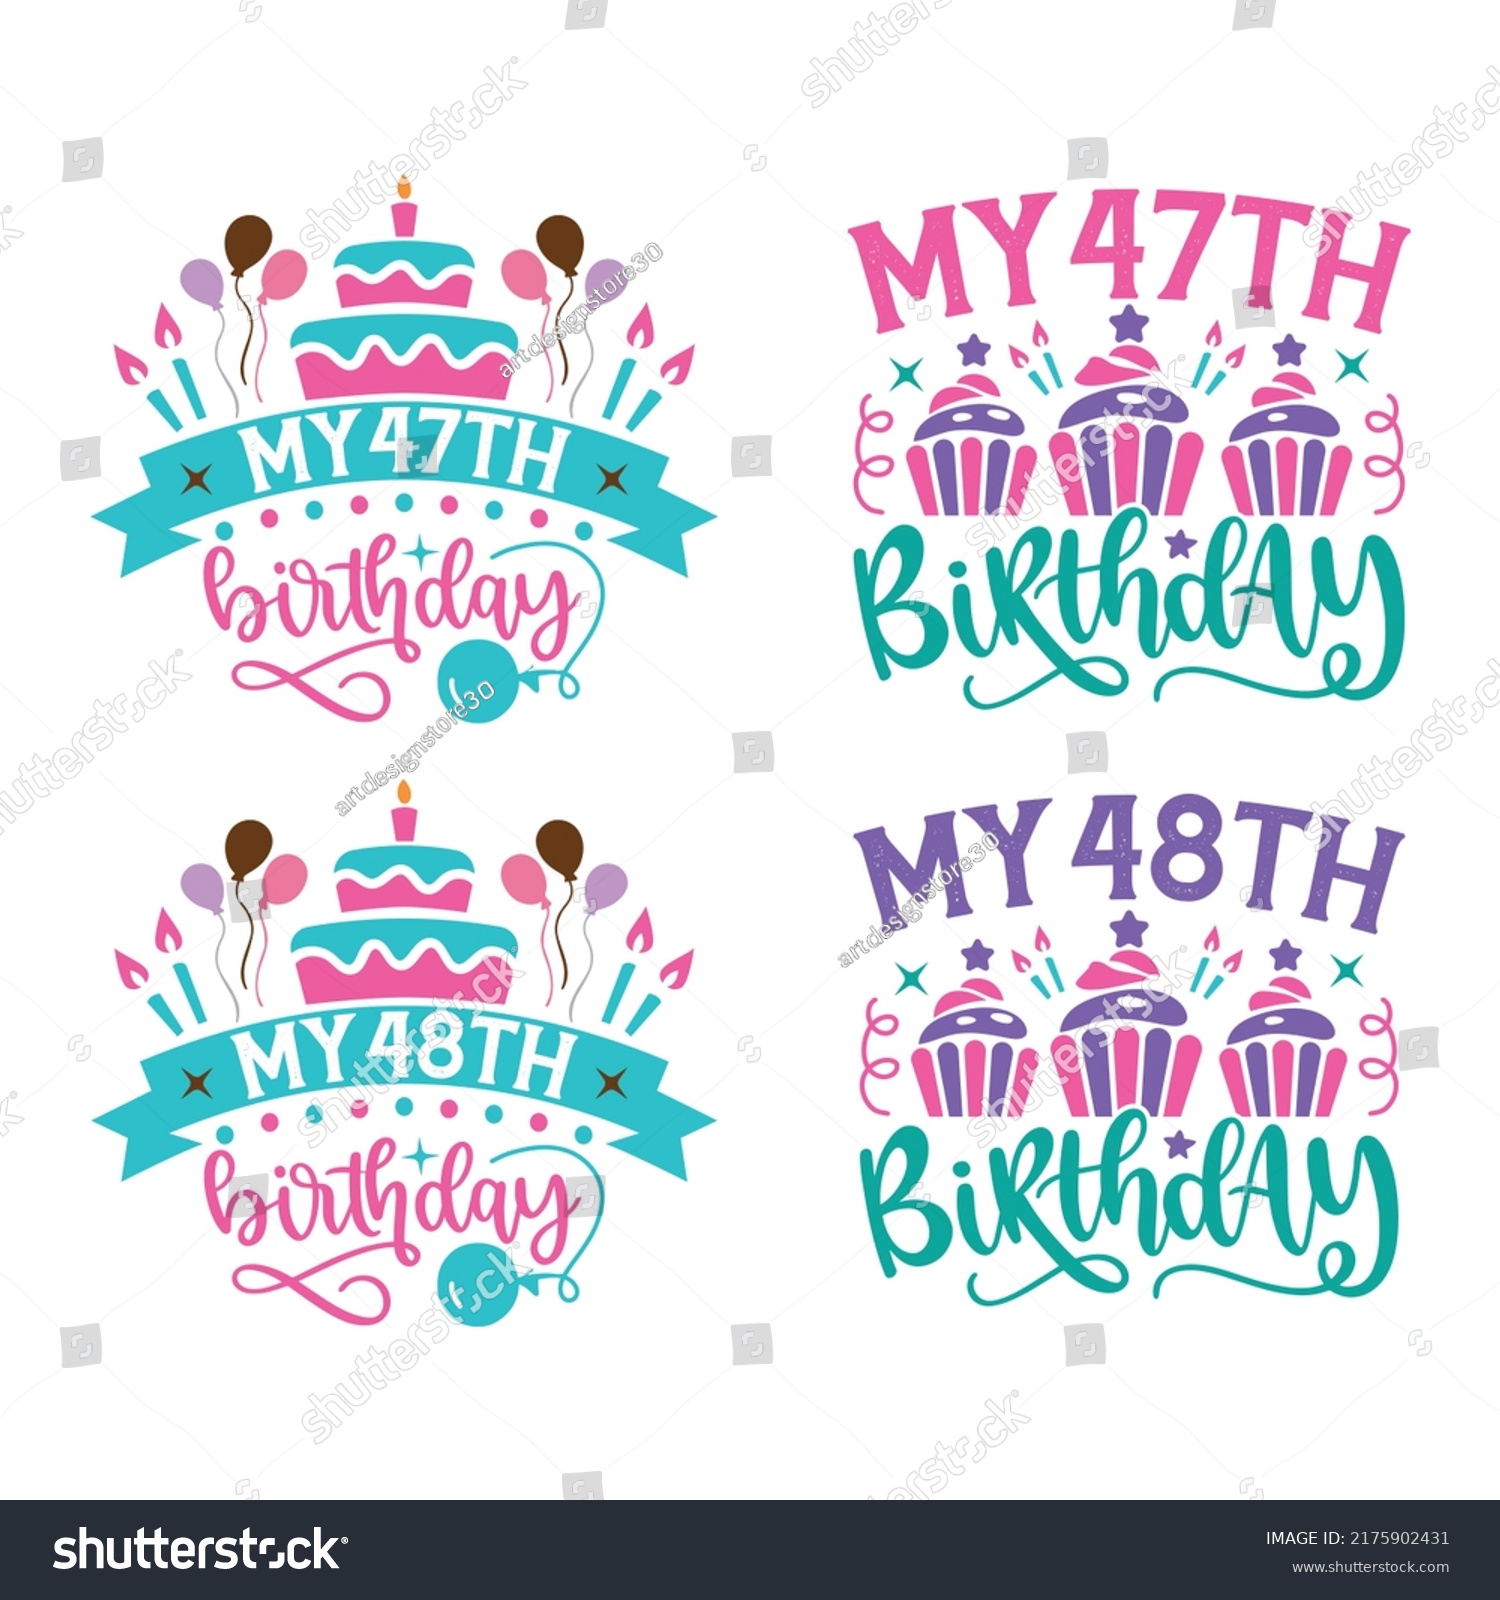 SVG of Happy Birthday T-shirt And SVG Design Bundle, Happy Birthday card design elements. Birthday party design for postcard graphic design. Vector EPS Editable File Bundle, can you download this bundle. svg